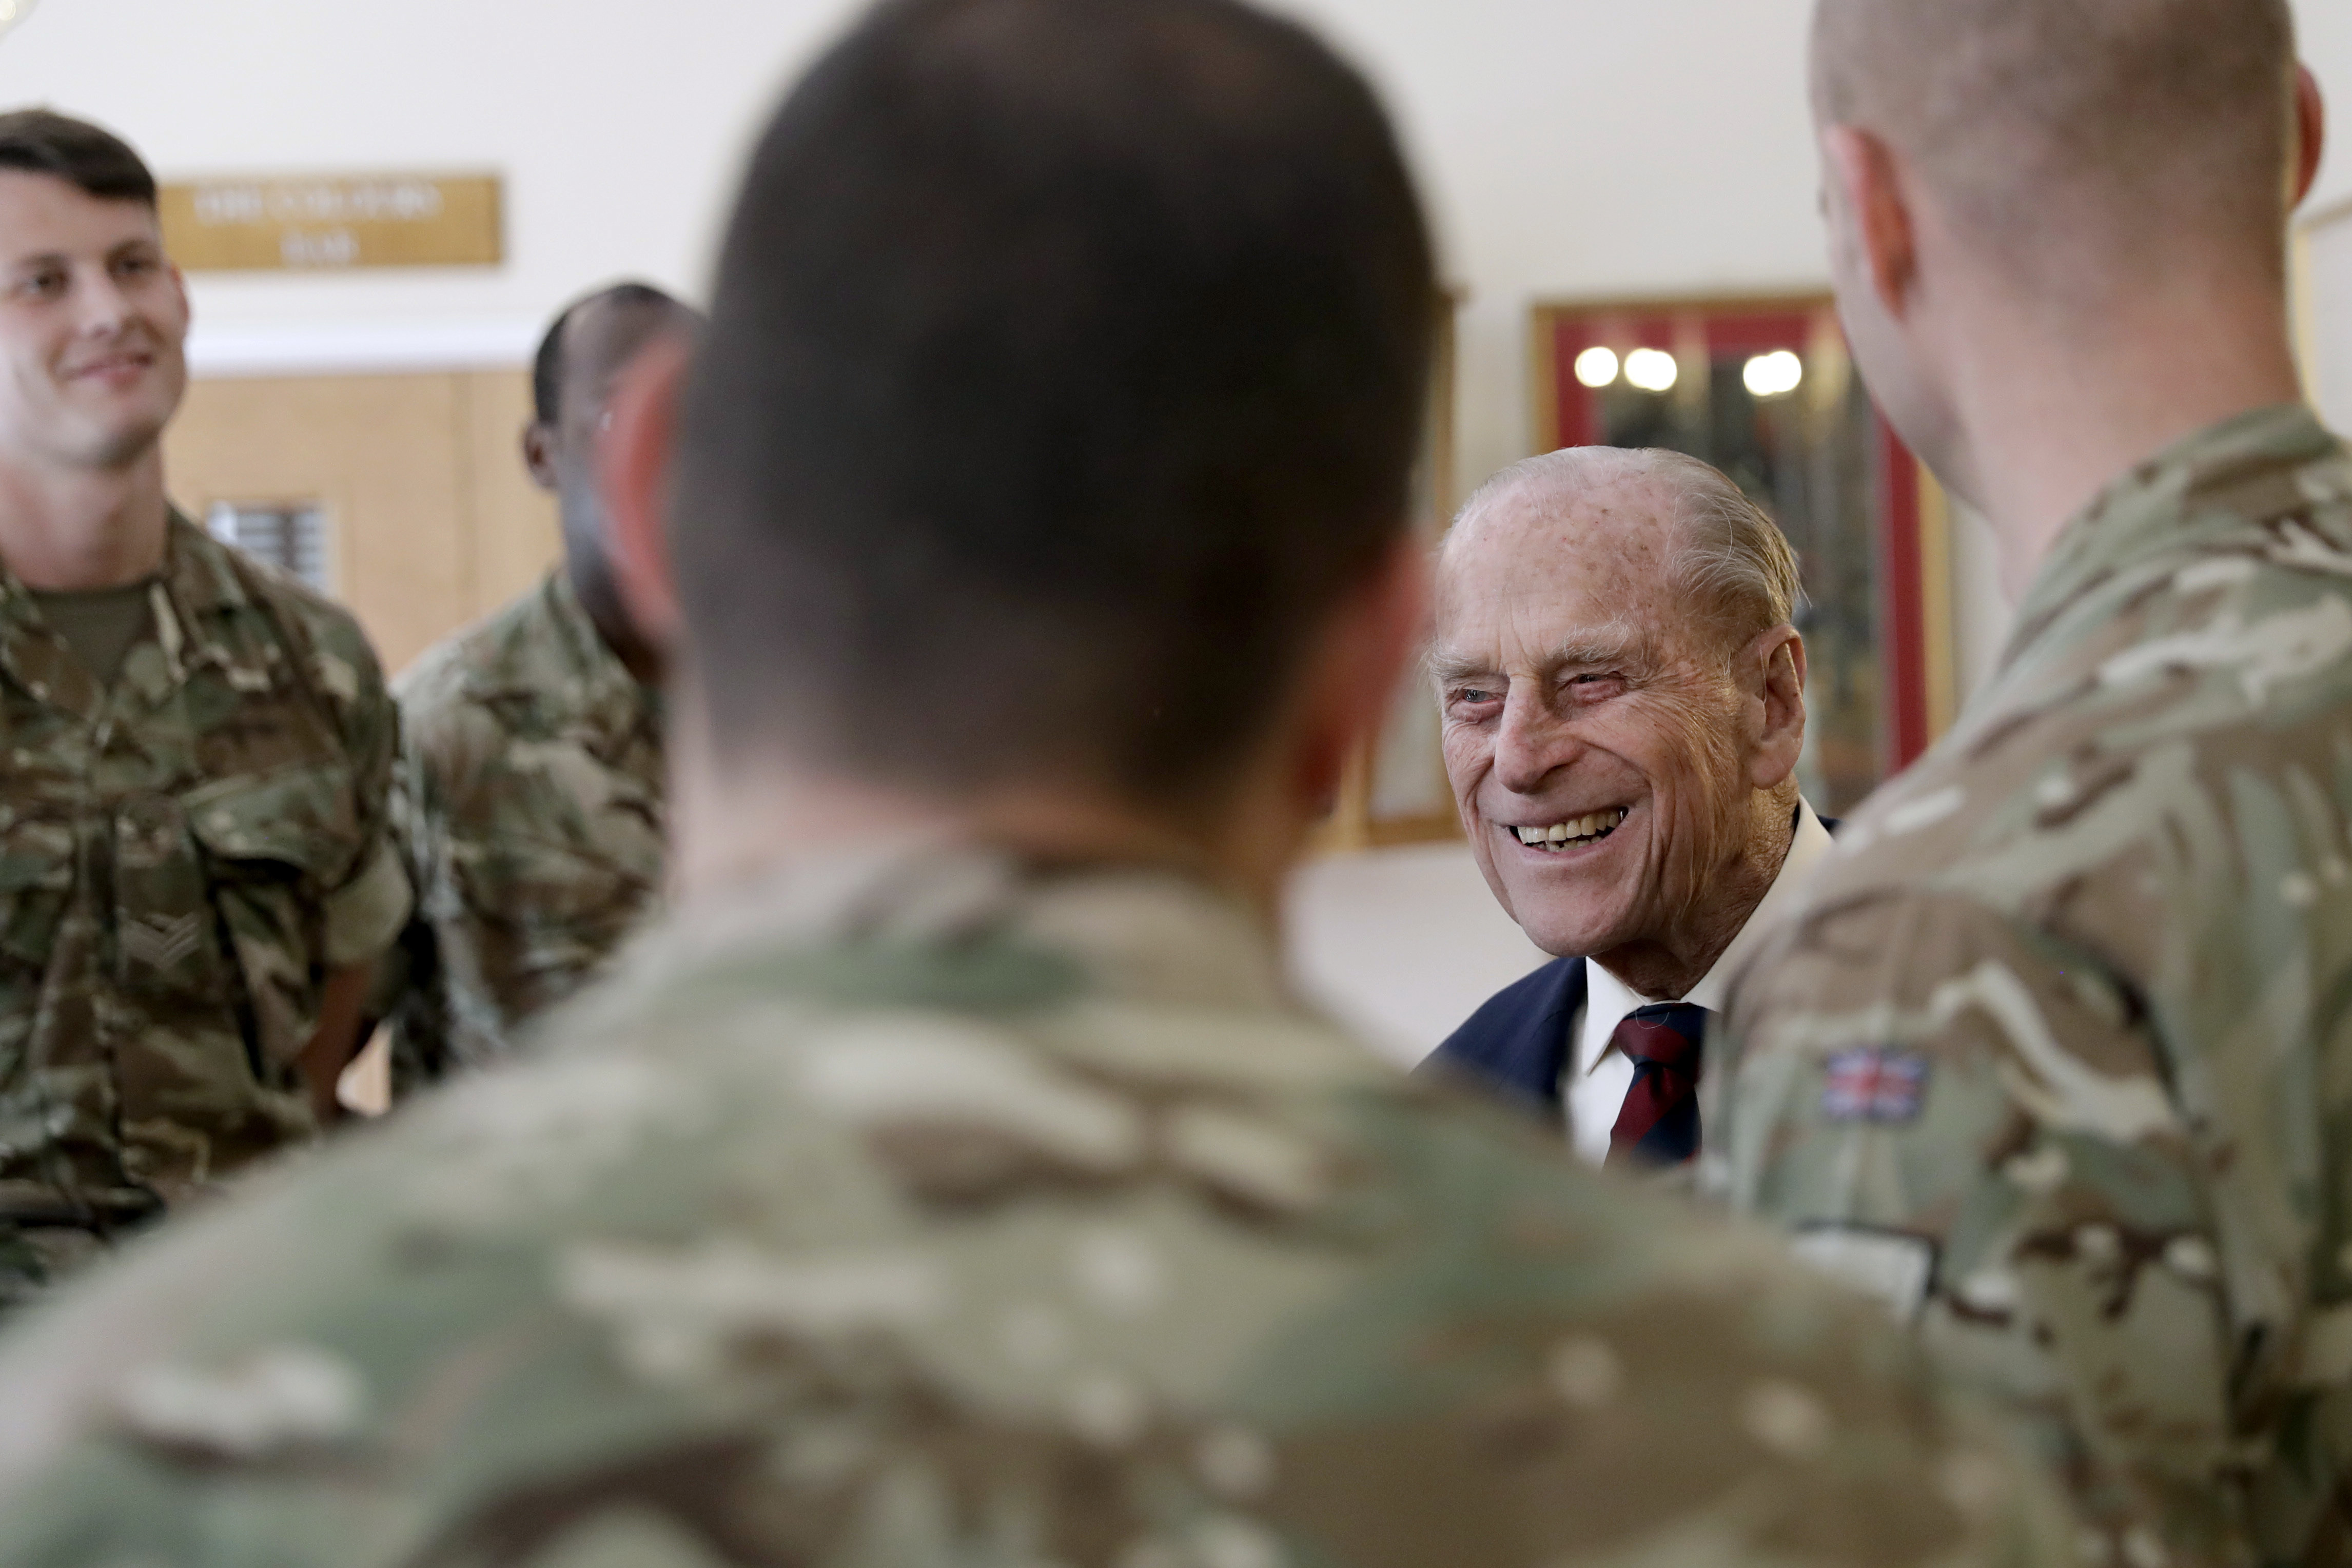 The Duke of Edinburgh meets soldiers in the Sergeants' Mess